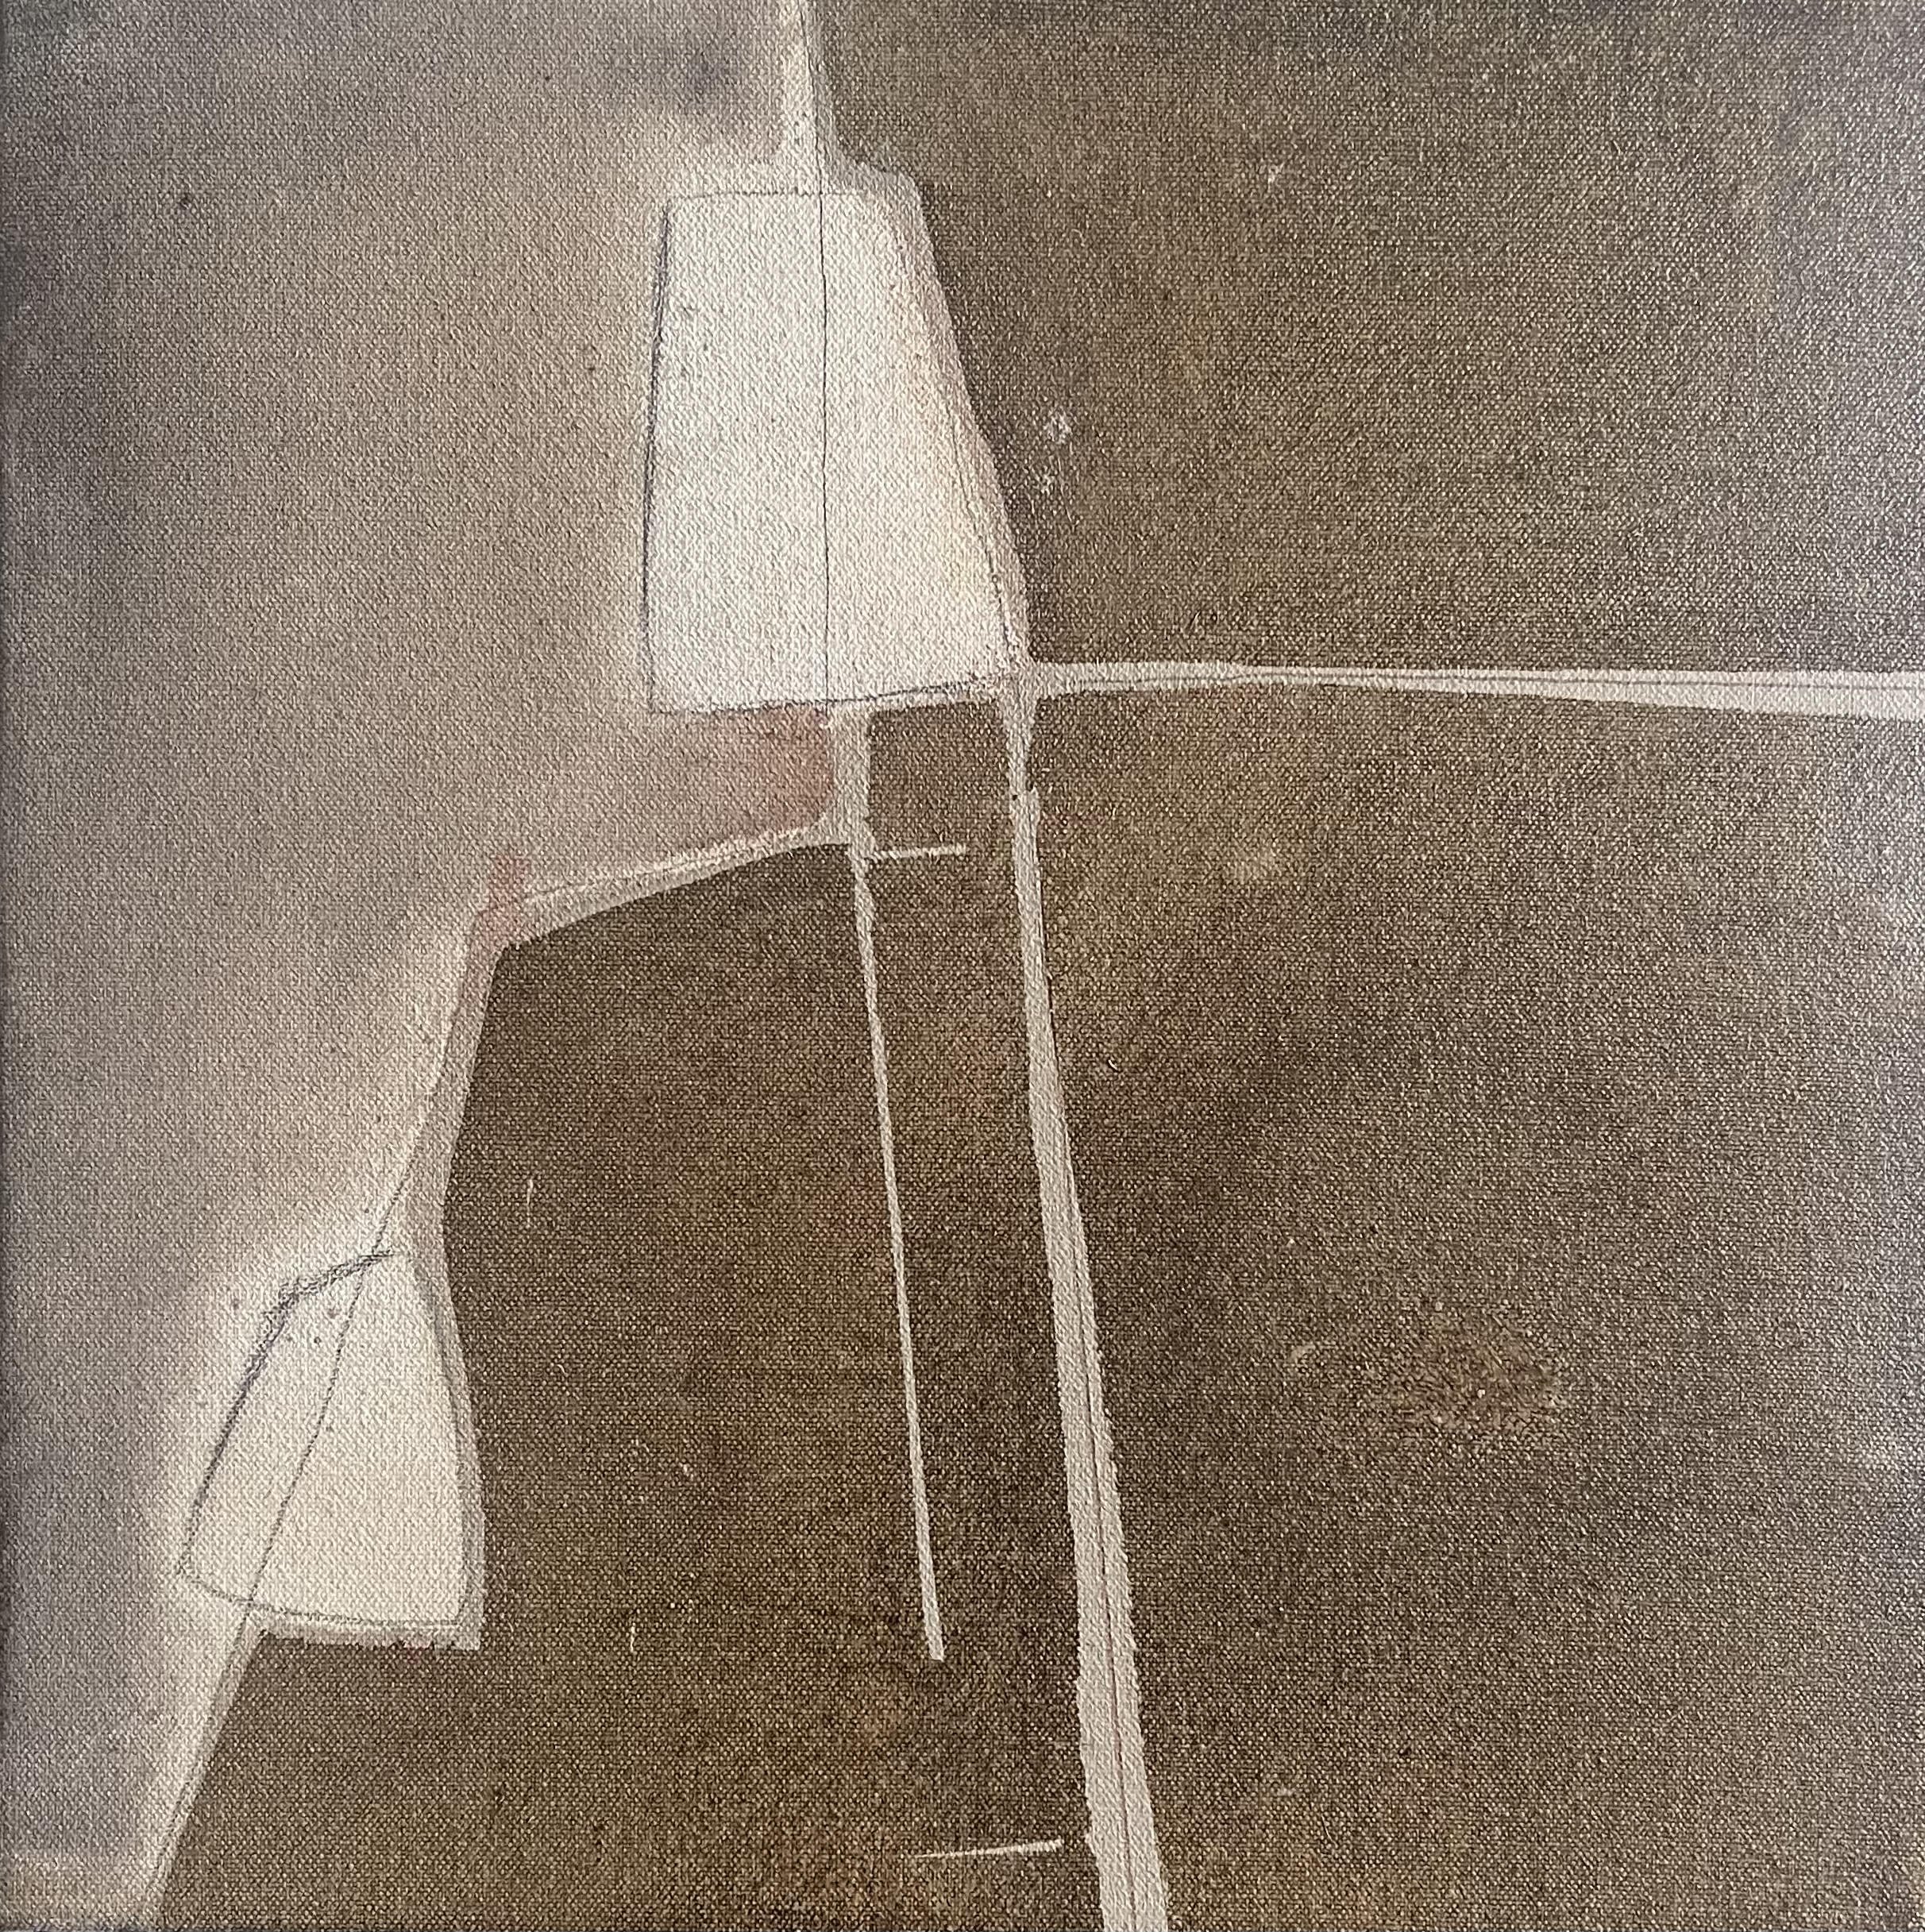 Untitled | 2022 | 12 x 12 x 2.5 (depth) inches | Minwax, acrylic, graphite on raw canvas